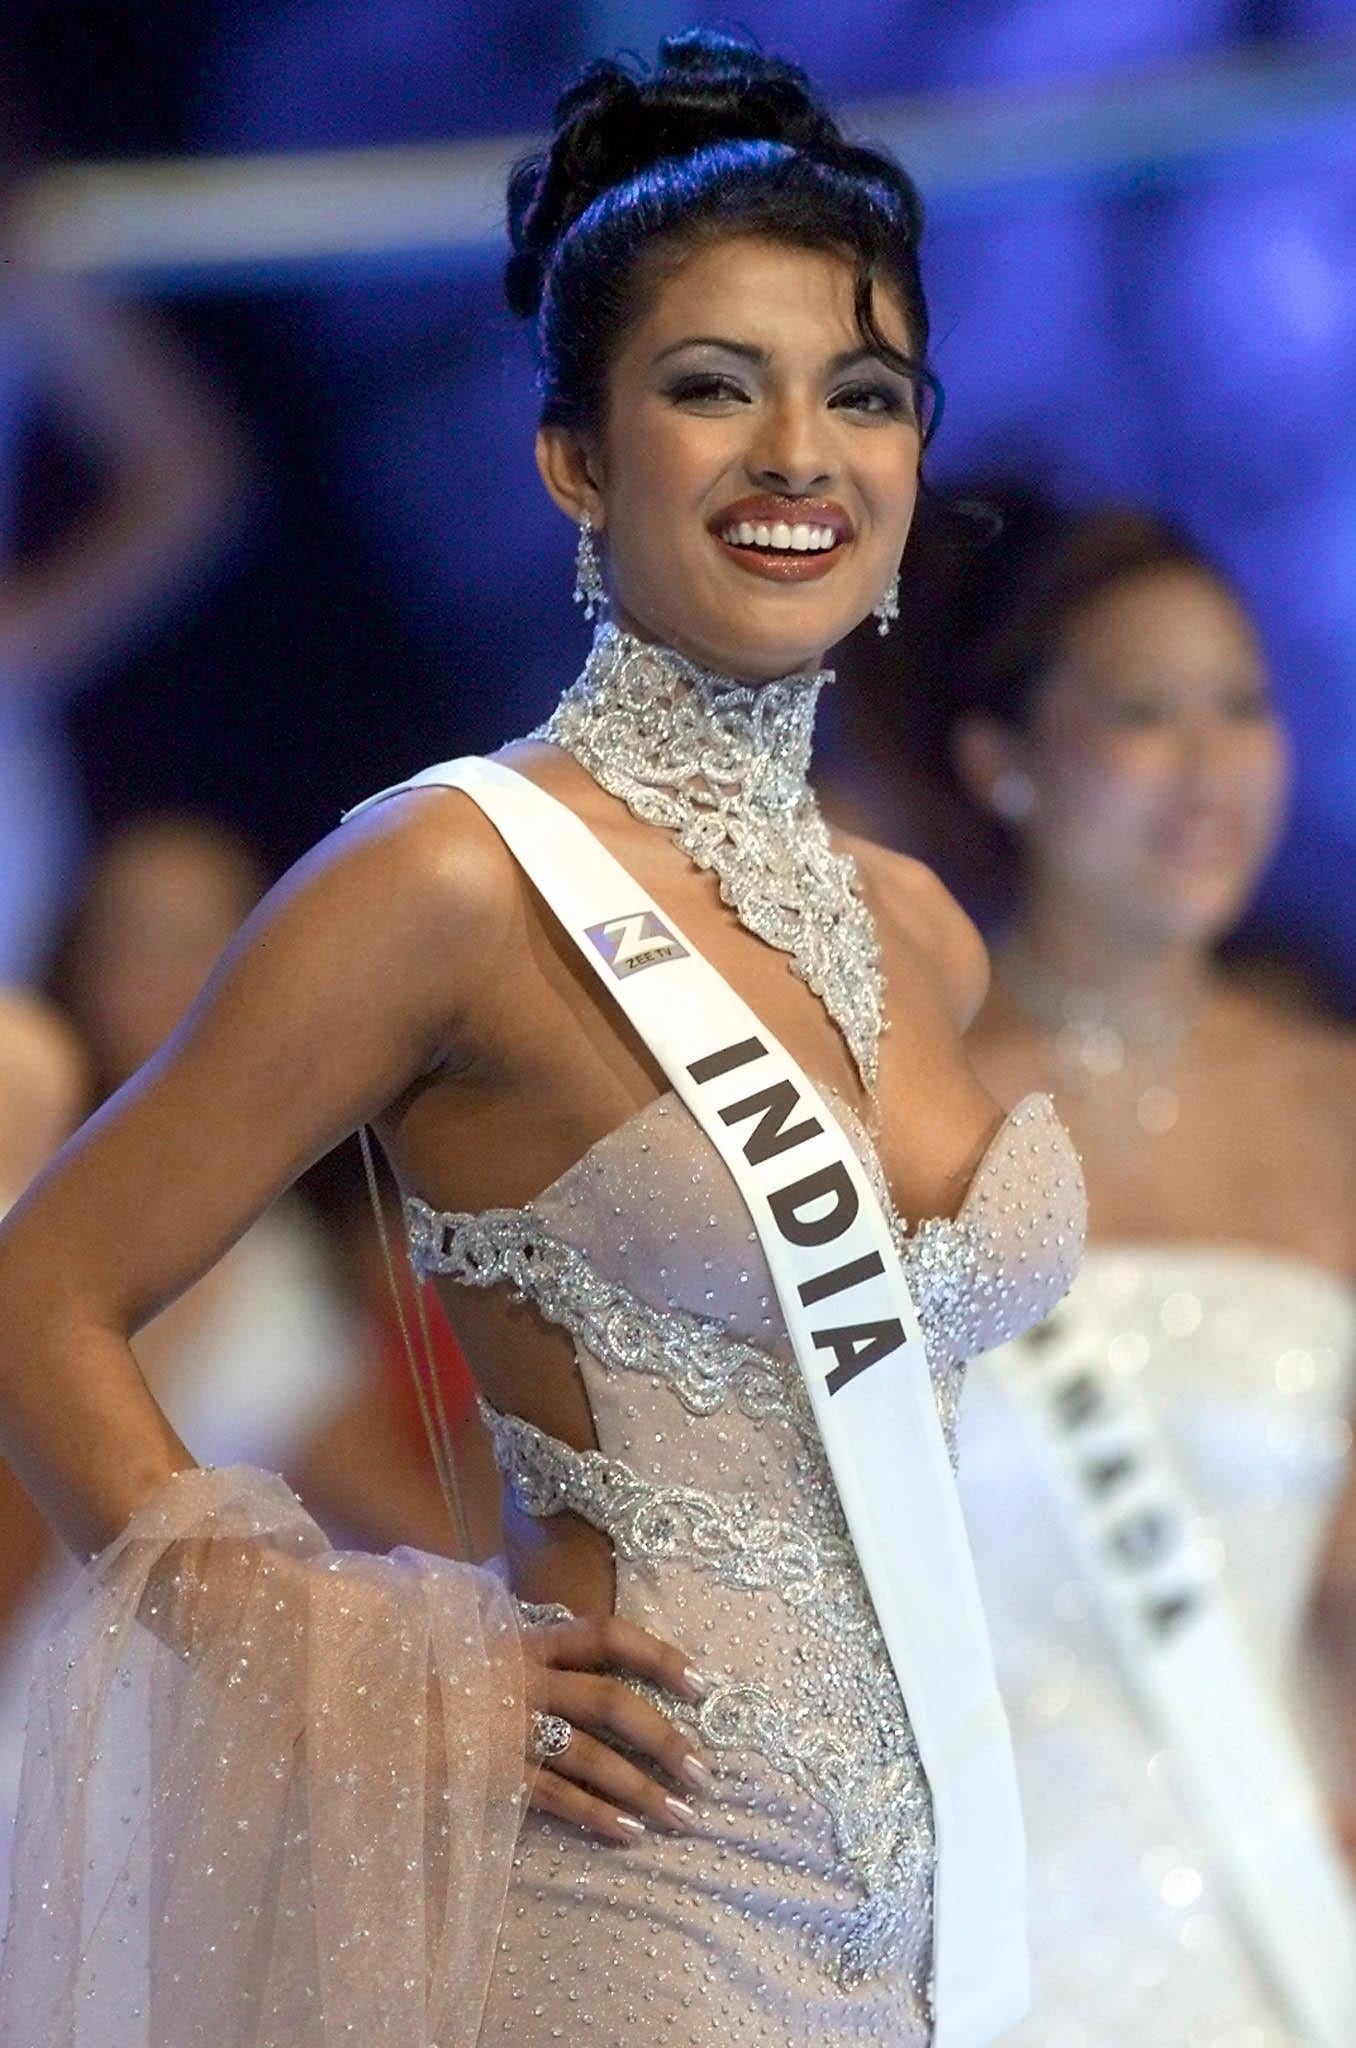 18 year old Priyanka Chopra of India poses on stage during the Miss World final at the Millenium Dome in London, 30 November 2000